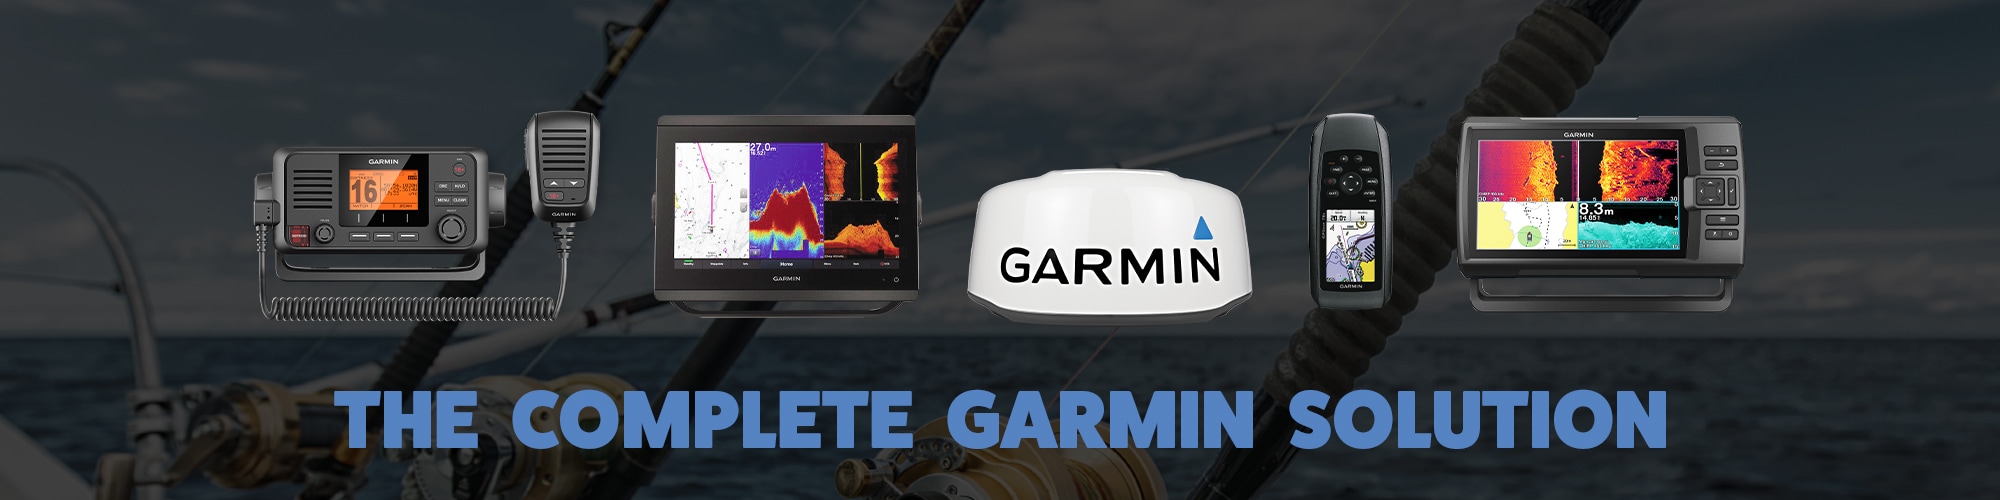 The Complete Garmin Solution